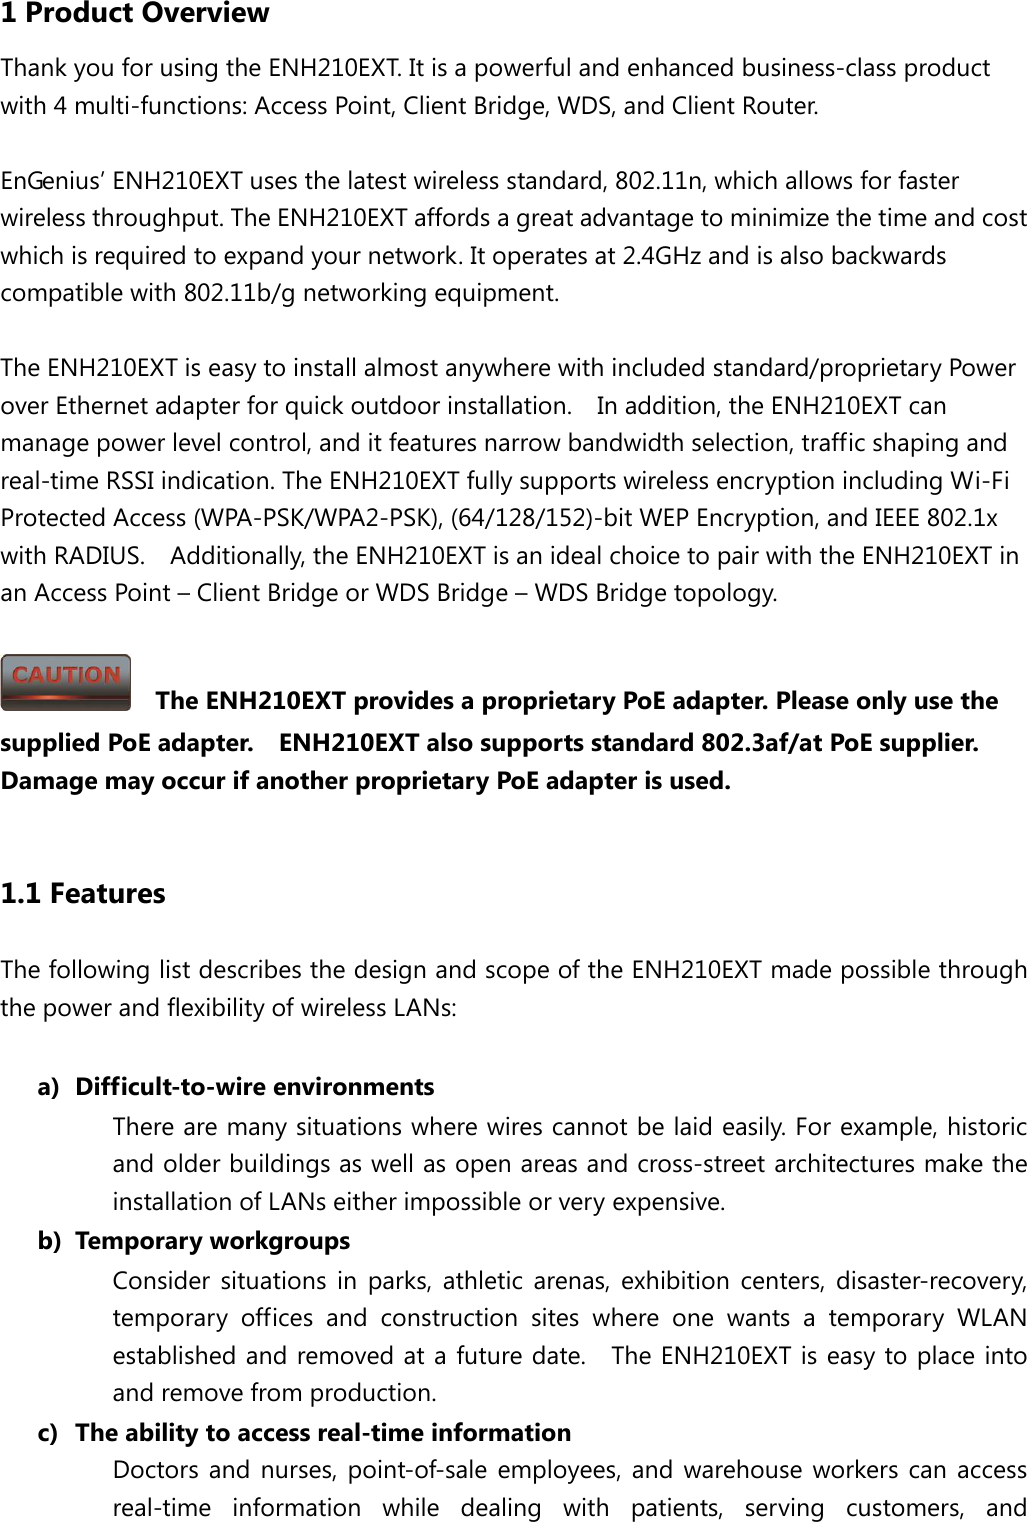 1 Product Overview Thank you for using the ENH210EXT. It is a powerful and enhanced business-class product with 4 multi-functions: Access Point, Client Bridge, WDS, and Client Router.  EnGenius’ ENH210EXT uses the latest wireless standard, 802.11n, which allows for faster wireless throughput. The ENH210EXT affords a great advantage to minimize the time and cost which is required to expand your network. It operates at 2.4GHz and is also backwards compatible with 802.11b/g networking equipment.  The ENH210EXT is easy to install almost anywhere with included standard/proprietary Power over Ethernet adapter for quick outdoor installation.    In addition, the ENH210EXT can manage power level control, and it features narrow bandwidth selection, traffic shaping and real-time RSSI indication. The ENH210EXT fully supports wireless encryption including Wi-Fi Protected Access (WPA-PSK/WPA2-PSK), (64/128/152)-bit WEP Encryption, and IEEE 802.1x with RADIUS.    Additionally, the ENH210EXT is an ideal choice to pair with the ENH210EXT in an Access Point – Client Bridge or WDS Bridge – WDS Bridge topology.    The ENH210EXT provides a proprietary PoE adapter. Please only use the supplied PoE adapter.    ENH210EXT also supports standard 802.3af/at PoE supplier.   Damage may occur if another proprietary PoE adapter is used.  1.1 Features The following list describes the design and scope of the ENH210EXT made possible through the power and flexibility of wireless LANs:  a) Difficult-to-wire environments There are many situations where wires cannot be laid easily. For example, historic and older buildings as well as open areas and cross-street architectures make the installation of LANs either impossible or very expensive. b) Temporary workgroups Consider situations in parks, athletic arenas, exhibition centers, disaster-recovery, temporary offices and construction sites where one wants a temporary WLAN established and removed at a future date.   The ENH210EXT is easy to place into and remove from production. c) The ability to access real-time information Doctors and nurses, point-of-sale employees, and warehouse workers can access real-time information while dealing with patients, serving customers, and 